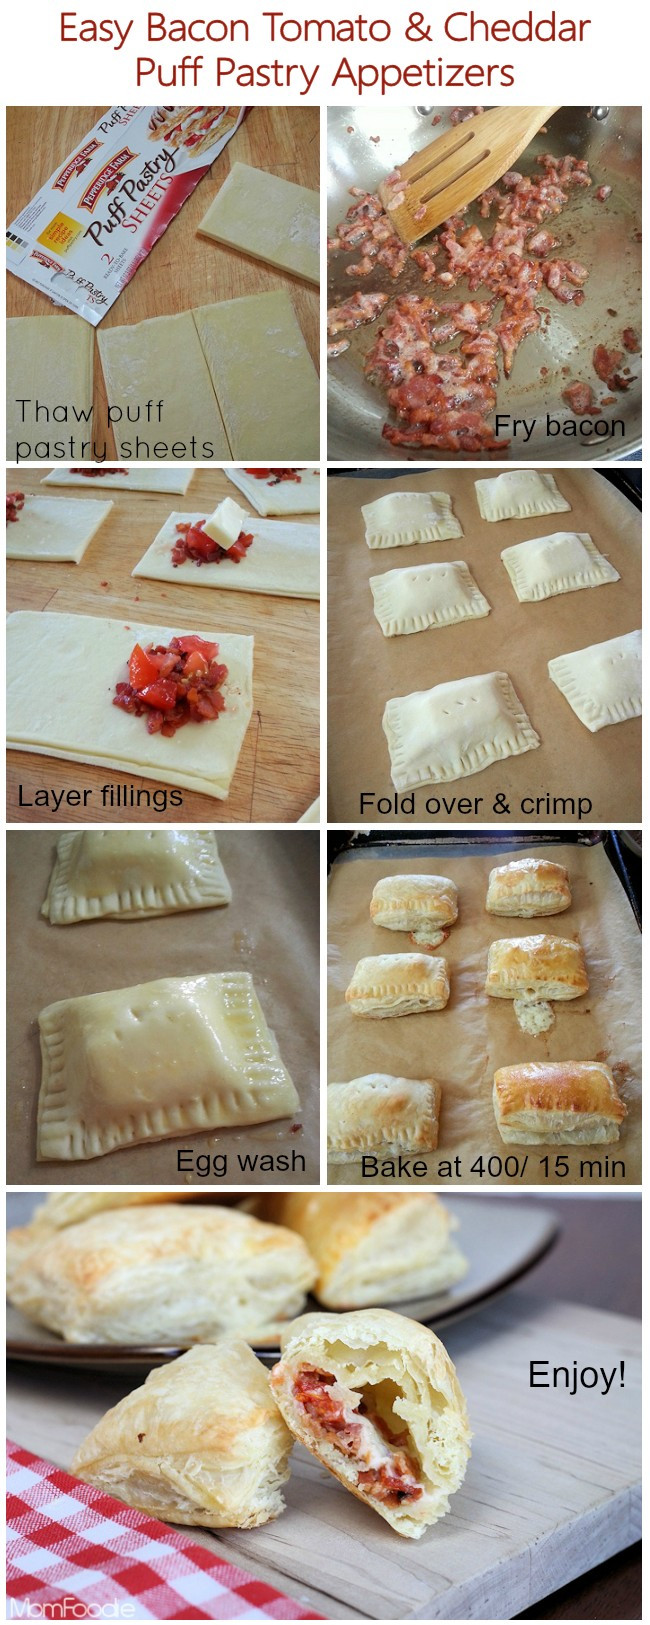 Appetizers With Puff Pastry Sheets
 Easy Bacon Tomato & Cheddar Puff Pastry Appetizers Mom